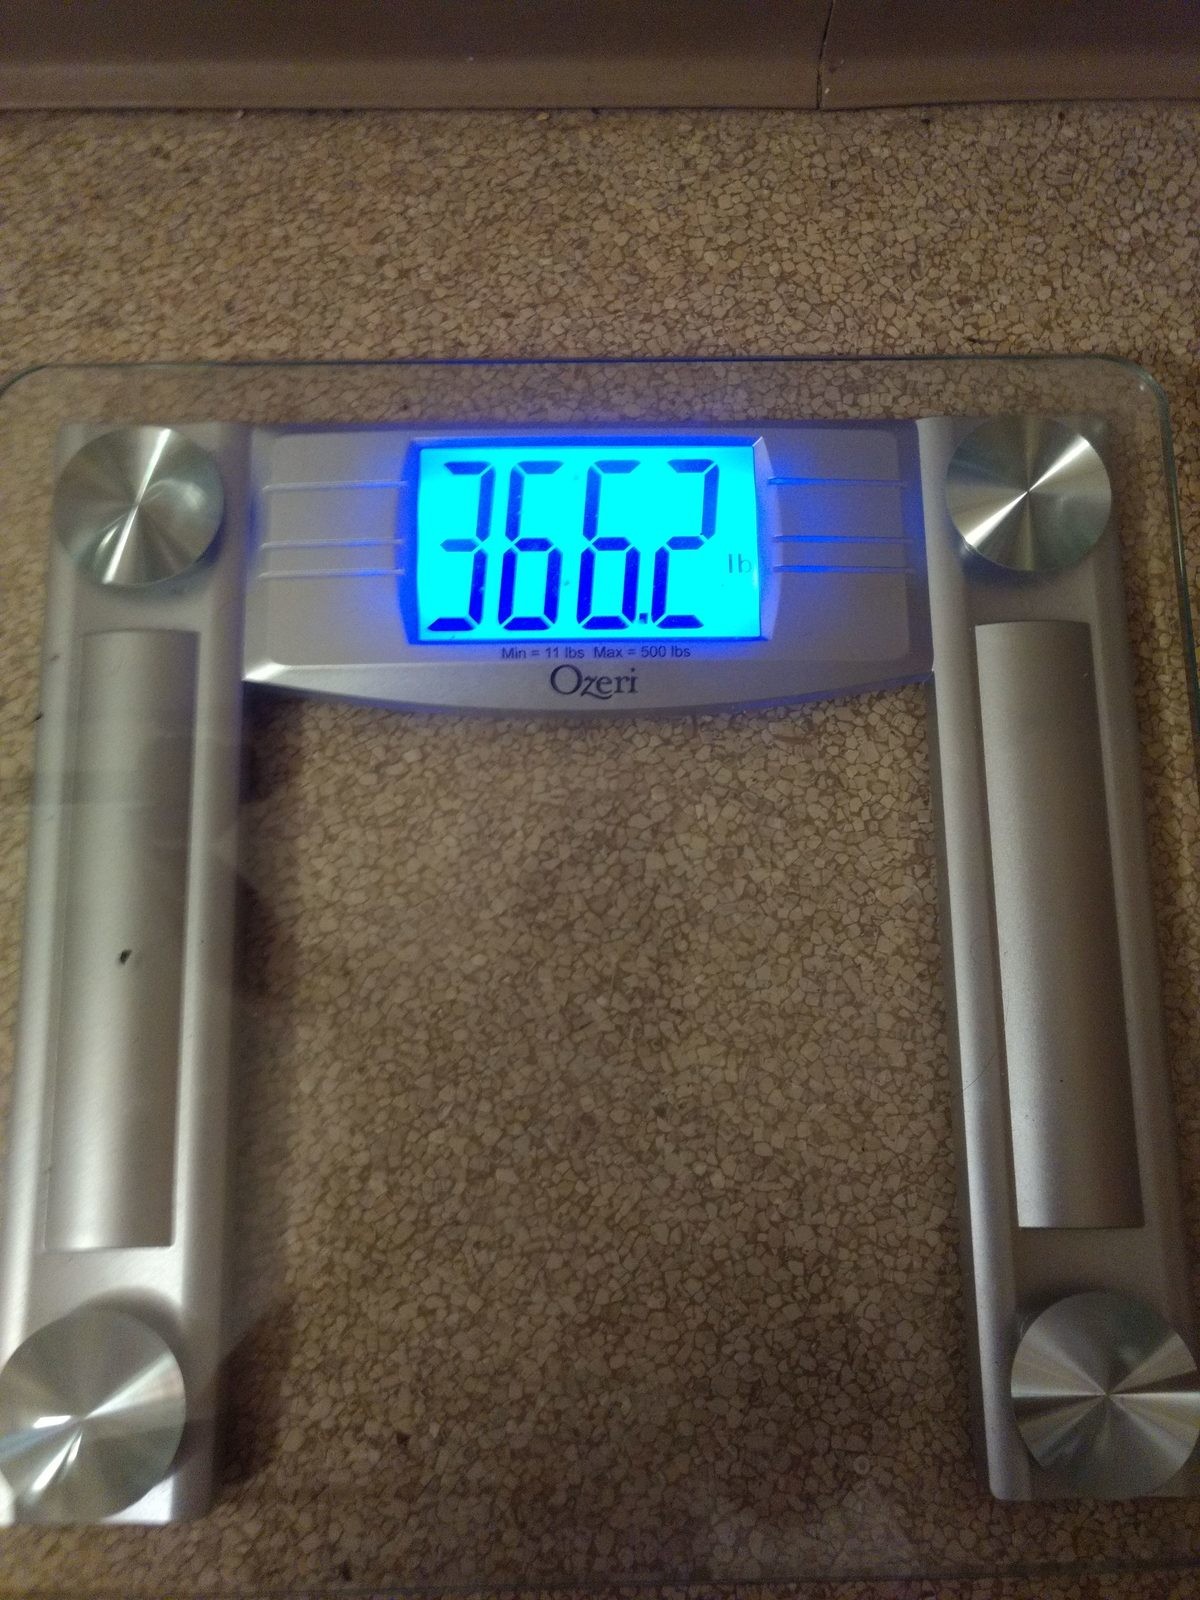 Weight loss July 2019 update. join list: WeightlossProgress (169 subs)Mention History.. You've been consistently losing weight, which is fantastic, but you're losing it incredibly slow for someone of your size. Please watch out for plateauing so ea